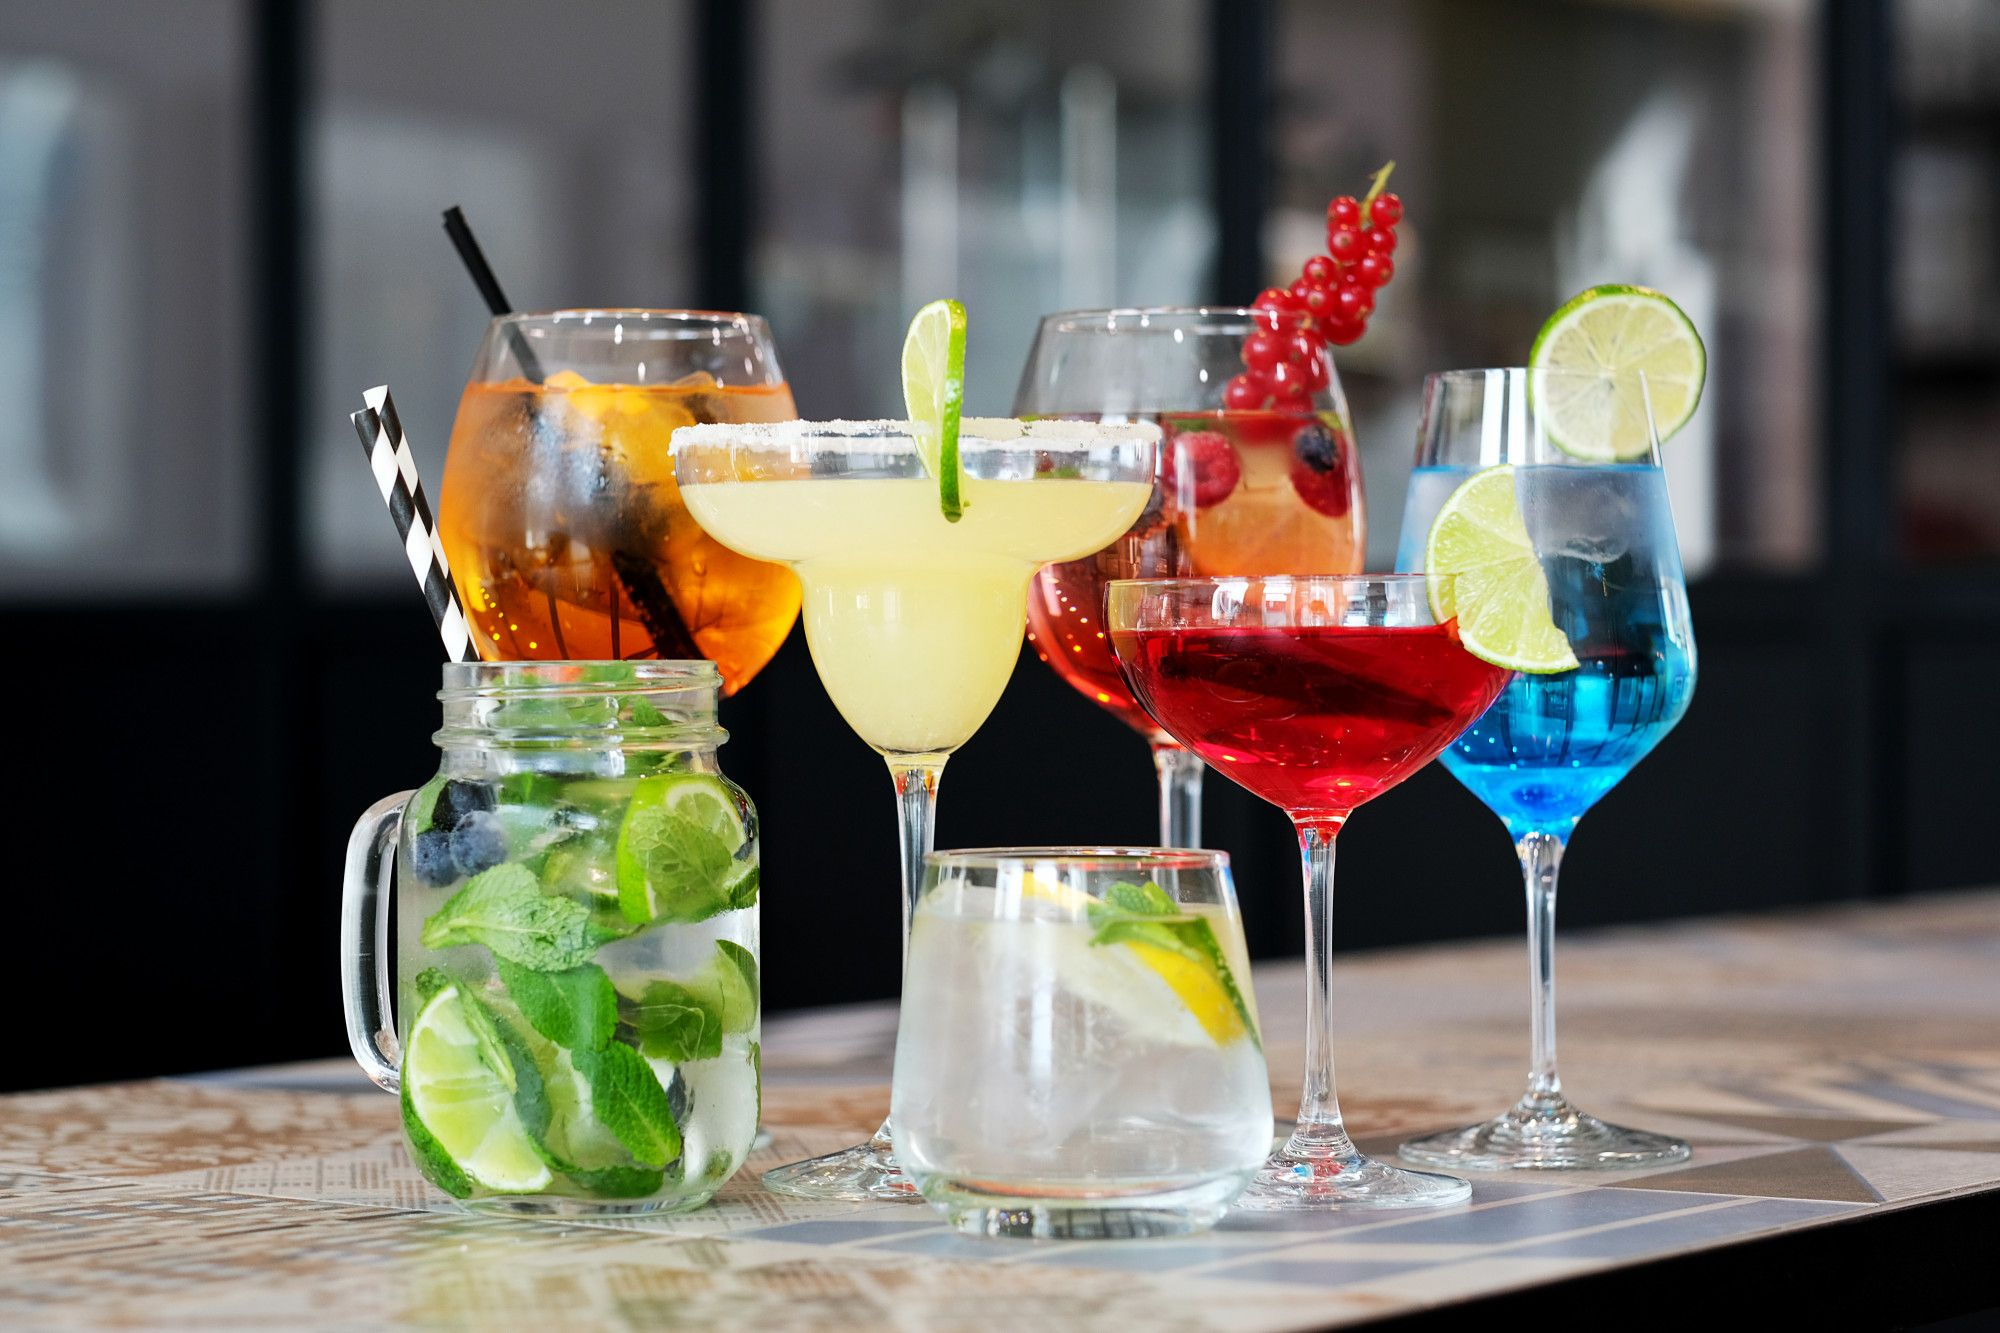 Various alcoholic beverages. Alcohol after bariatric surgery